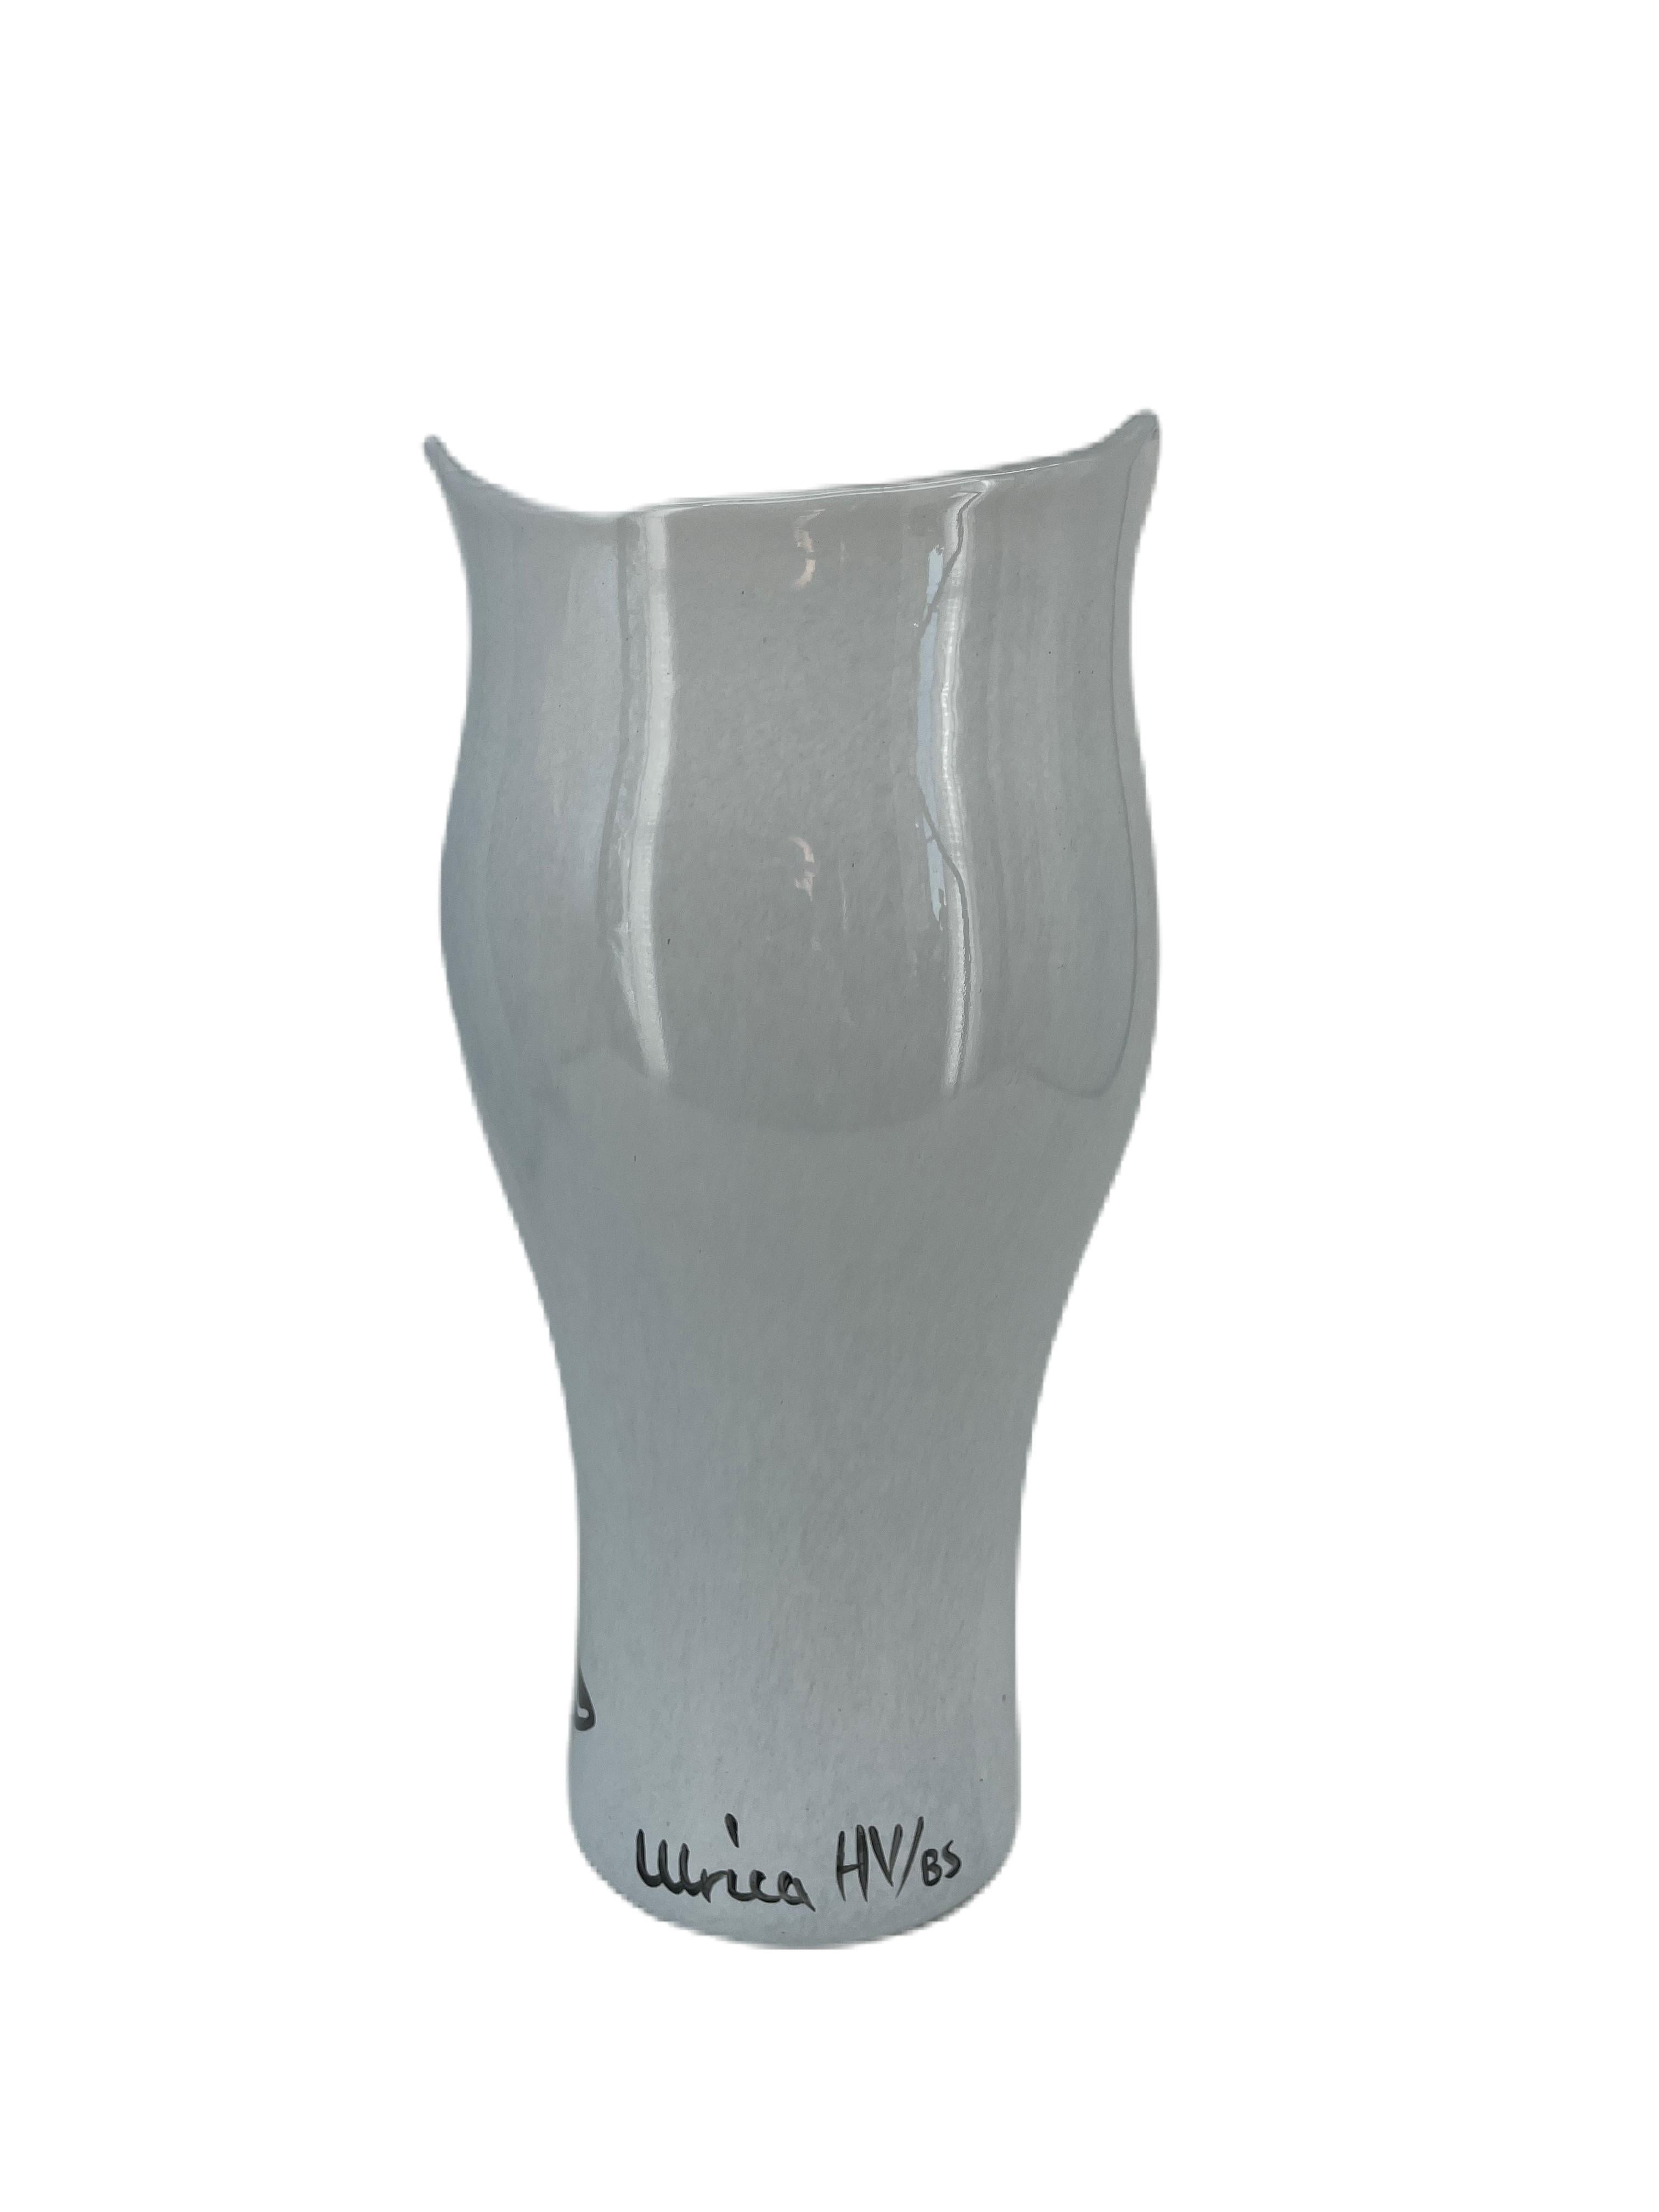 Ulrica Hydman Vallien glass vase with head shape, white glass and stylistic features. It is mouth-blown and hand-decorated, which gives it a unique feel. Ulrica designed the vase during the 2000s as part of the 